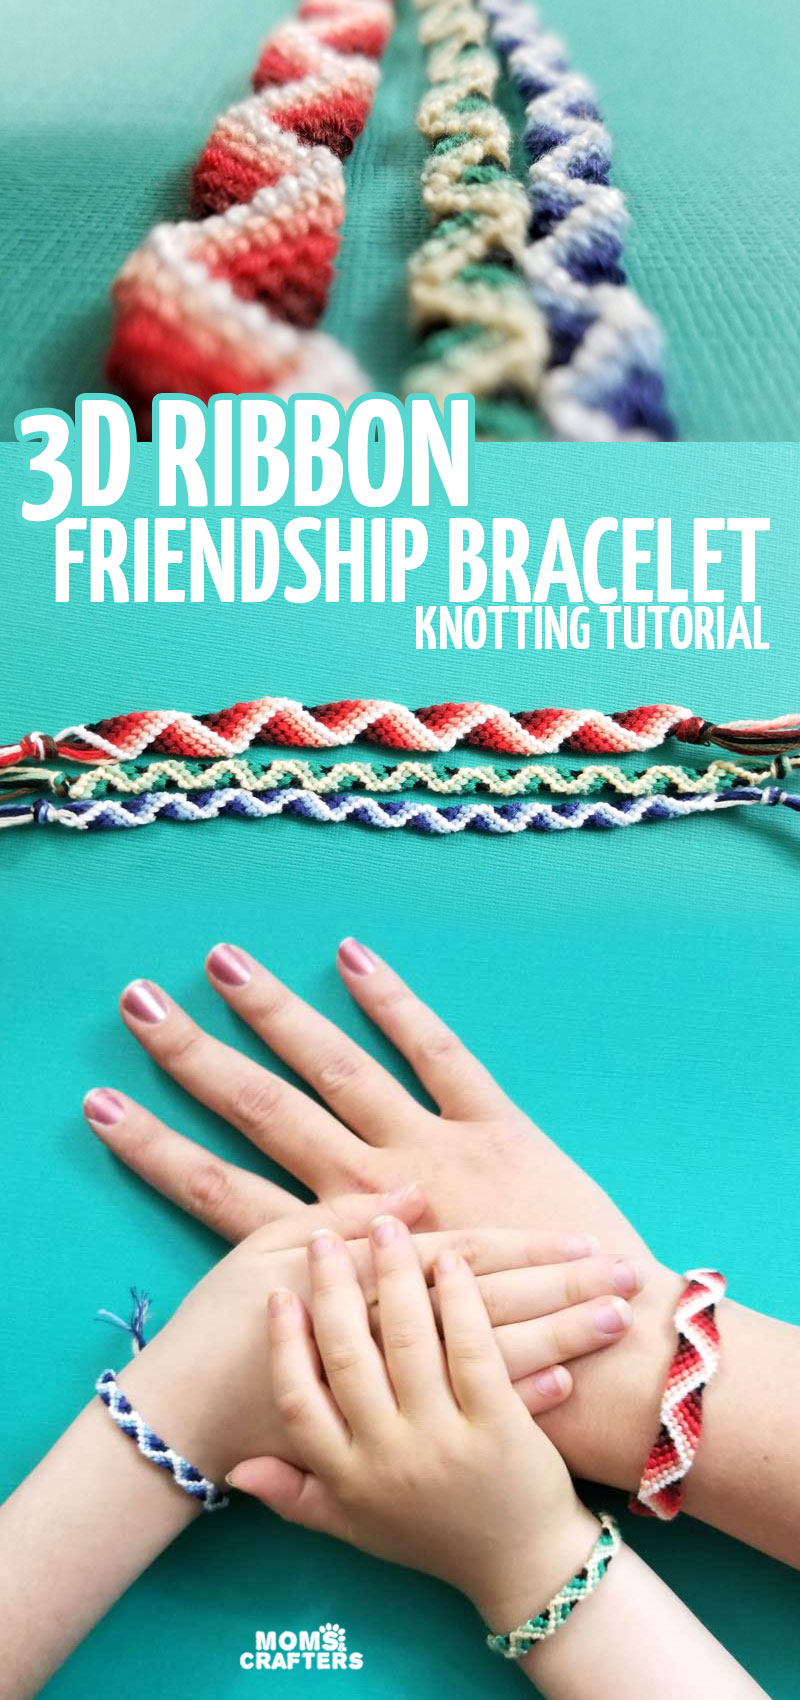 Bracelet Patterns With Embroidery Floss Zig Zag Friendship Bracelet Pattern With A 3d Effect Moms And